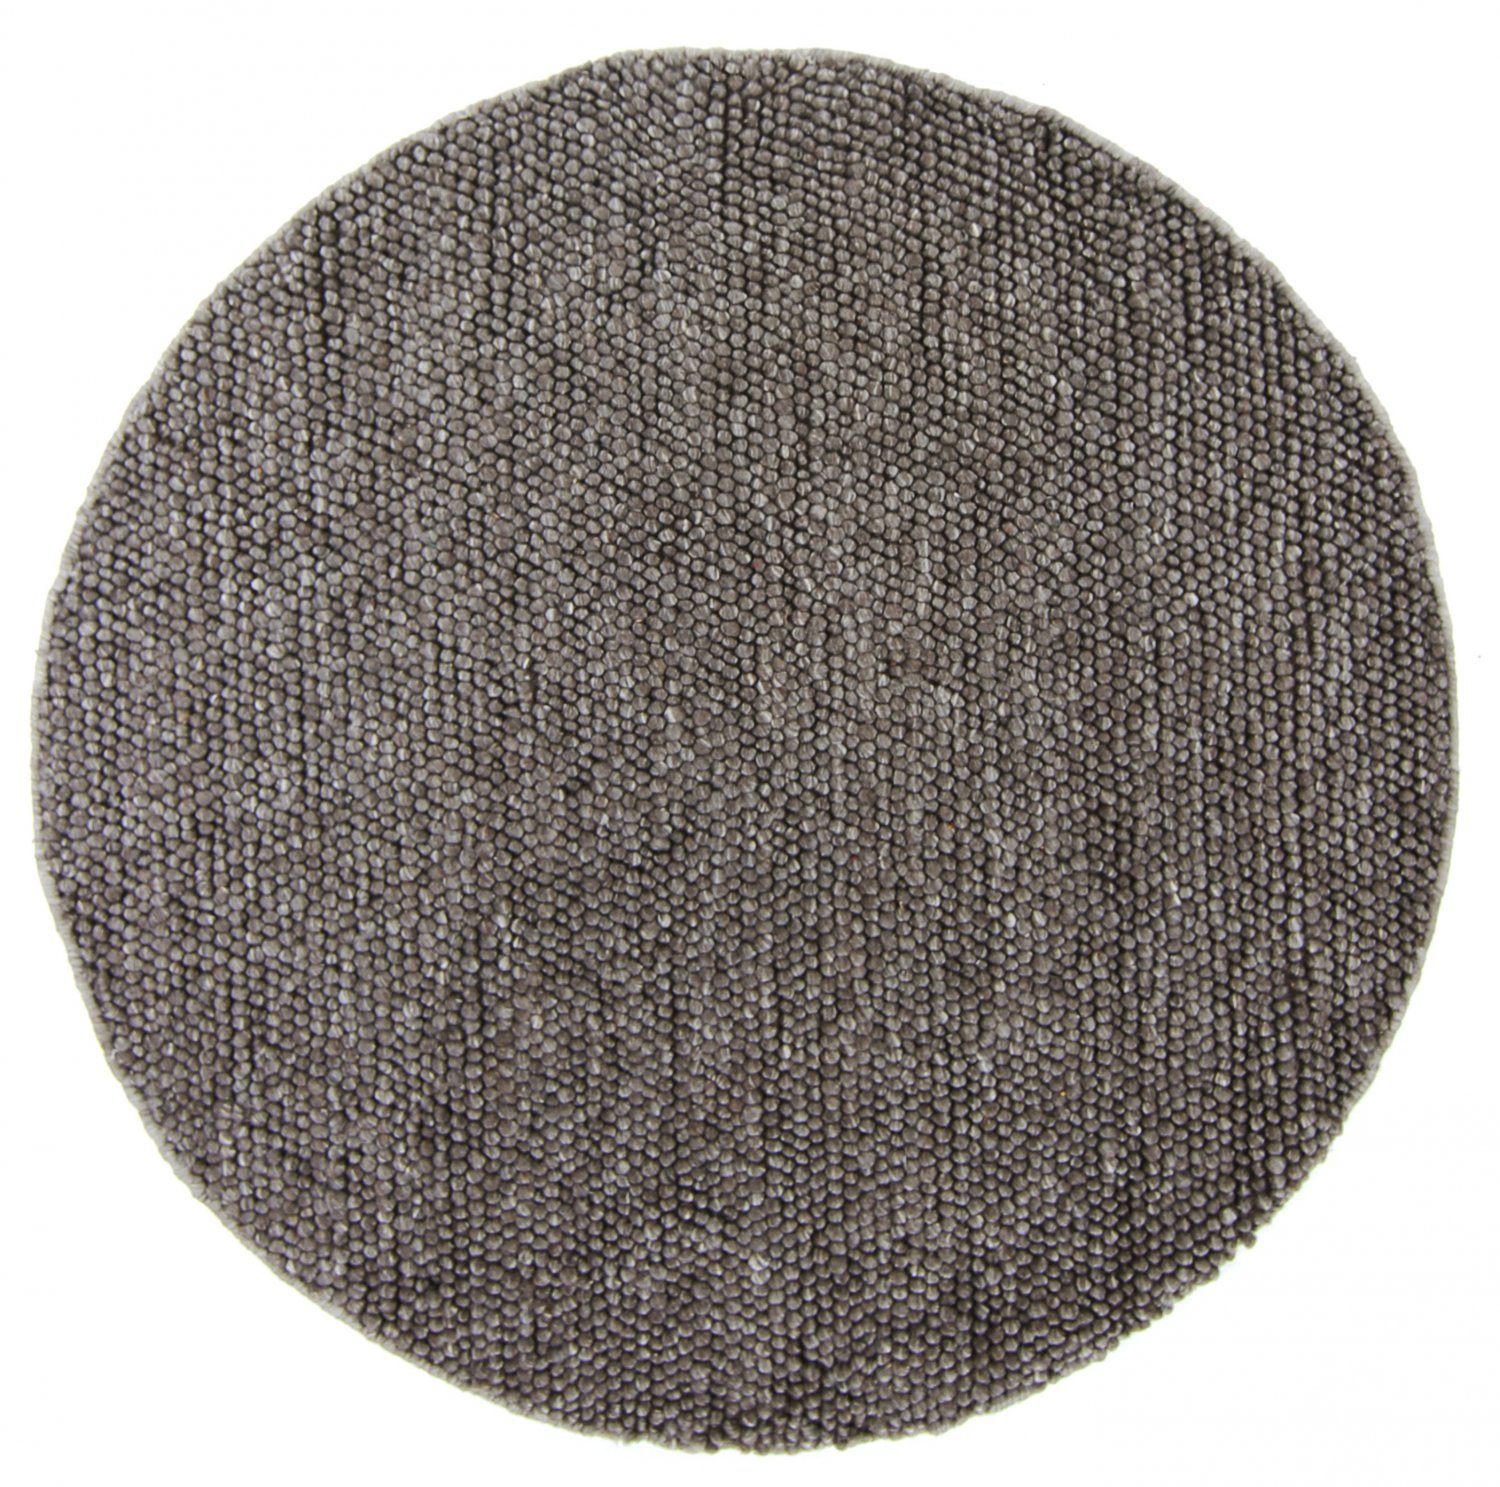 Runde tepper - Avafors Wool Bubble (antracit)